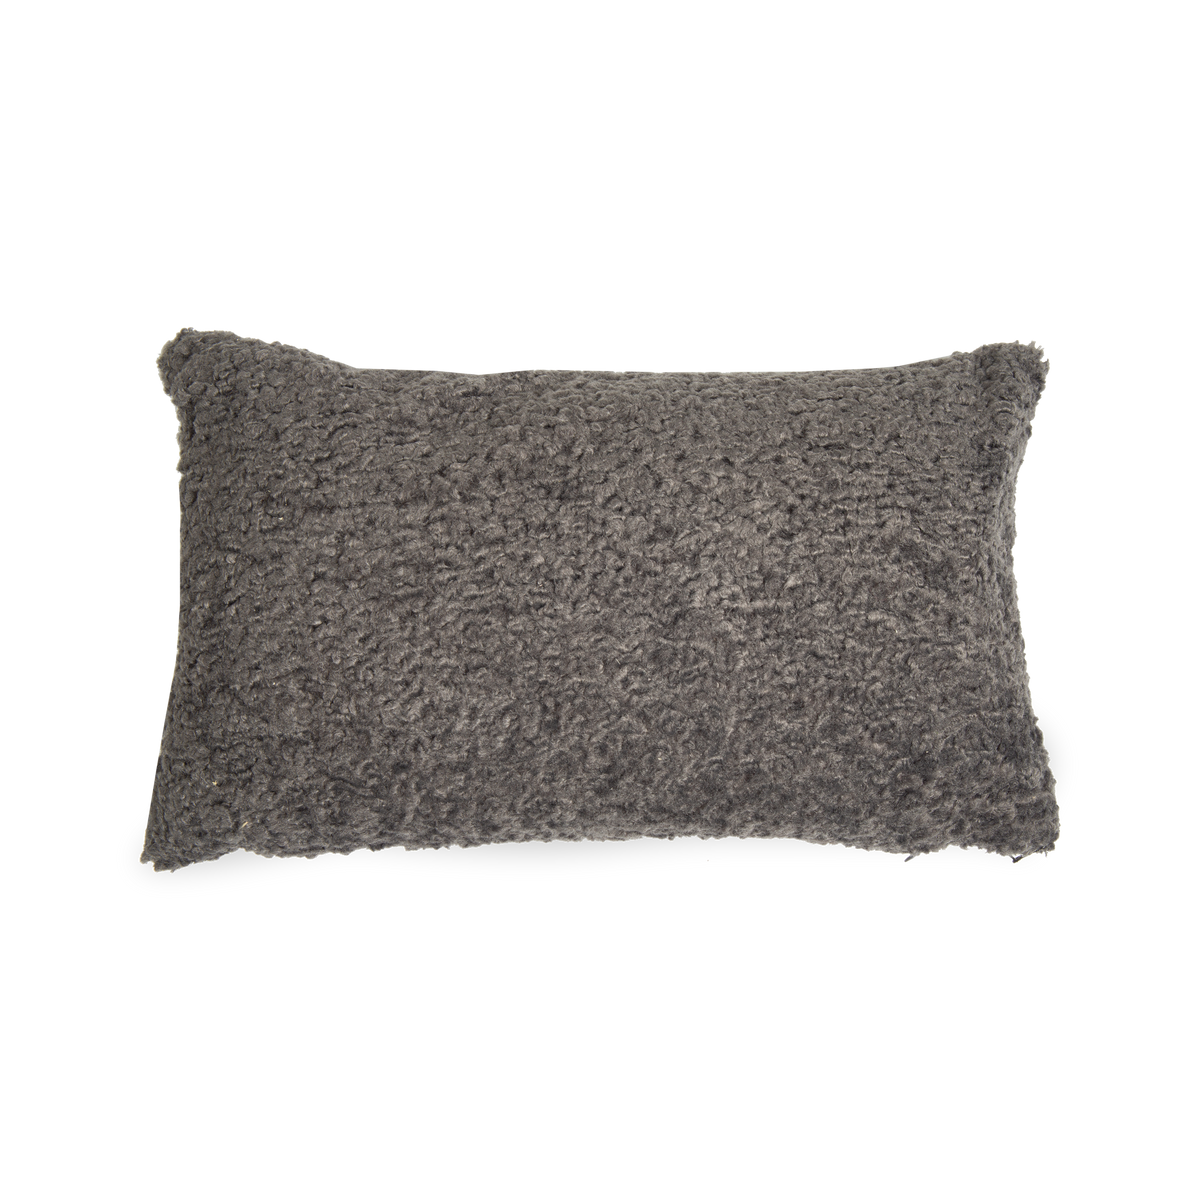 This grey Sheepskin Pillow adds natural texture to your space.